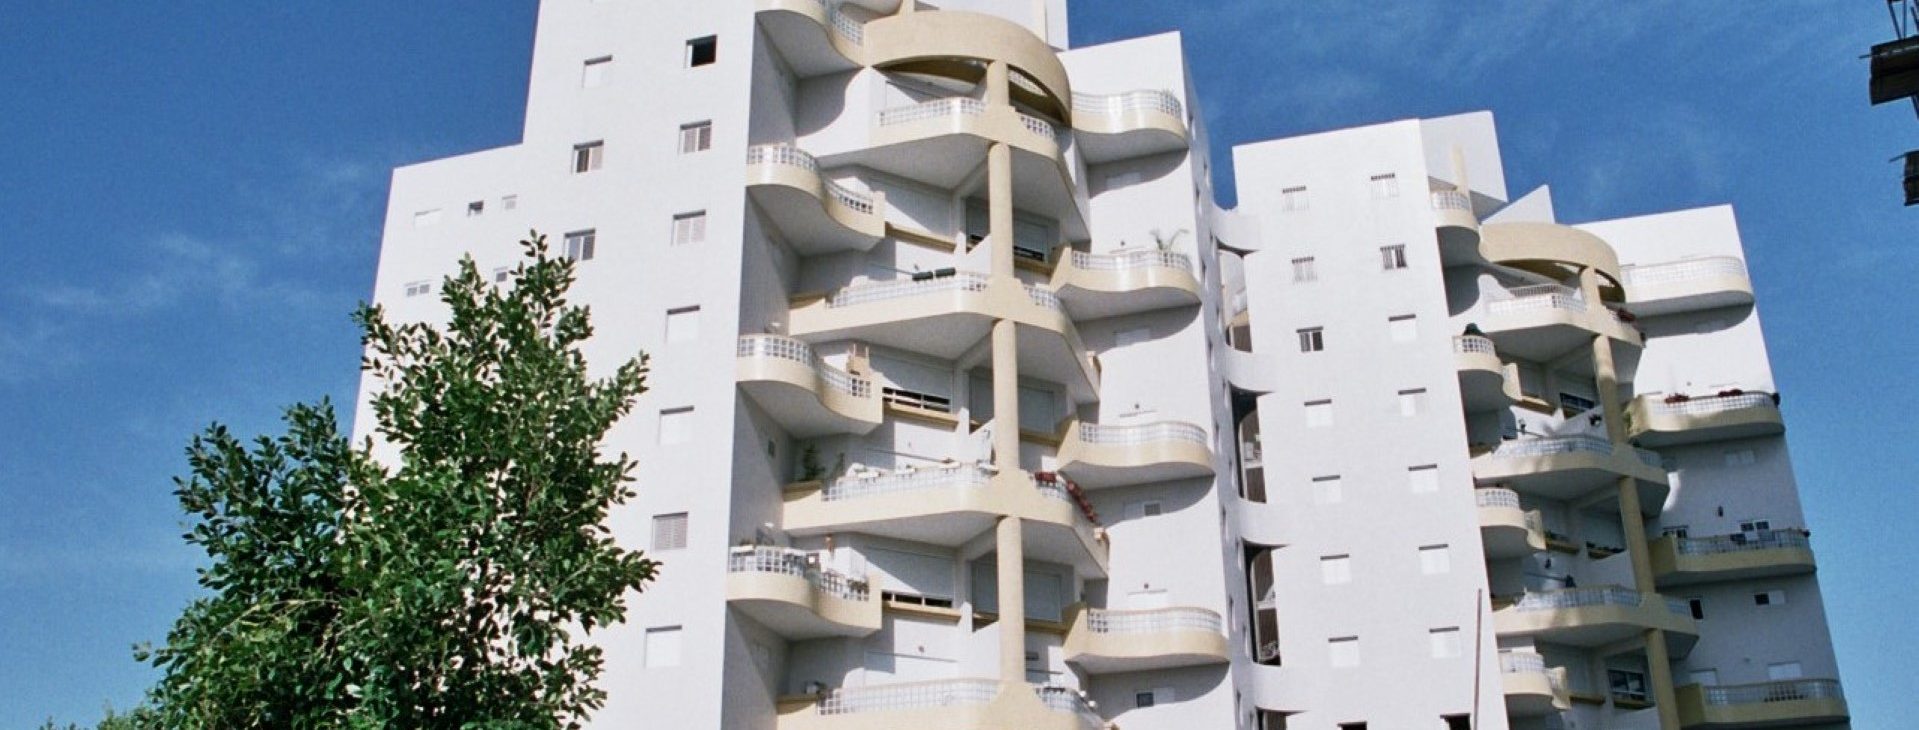 Photo of a building in Park Shikmim project in Rishon Lezion